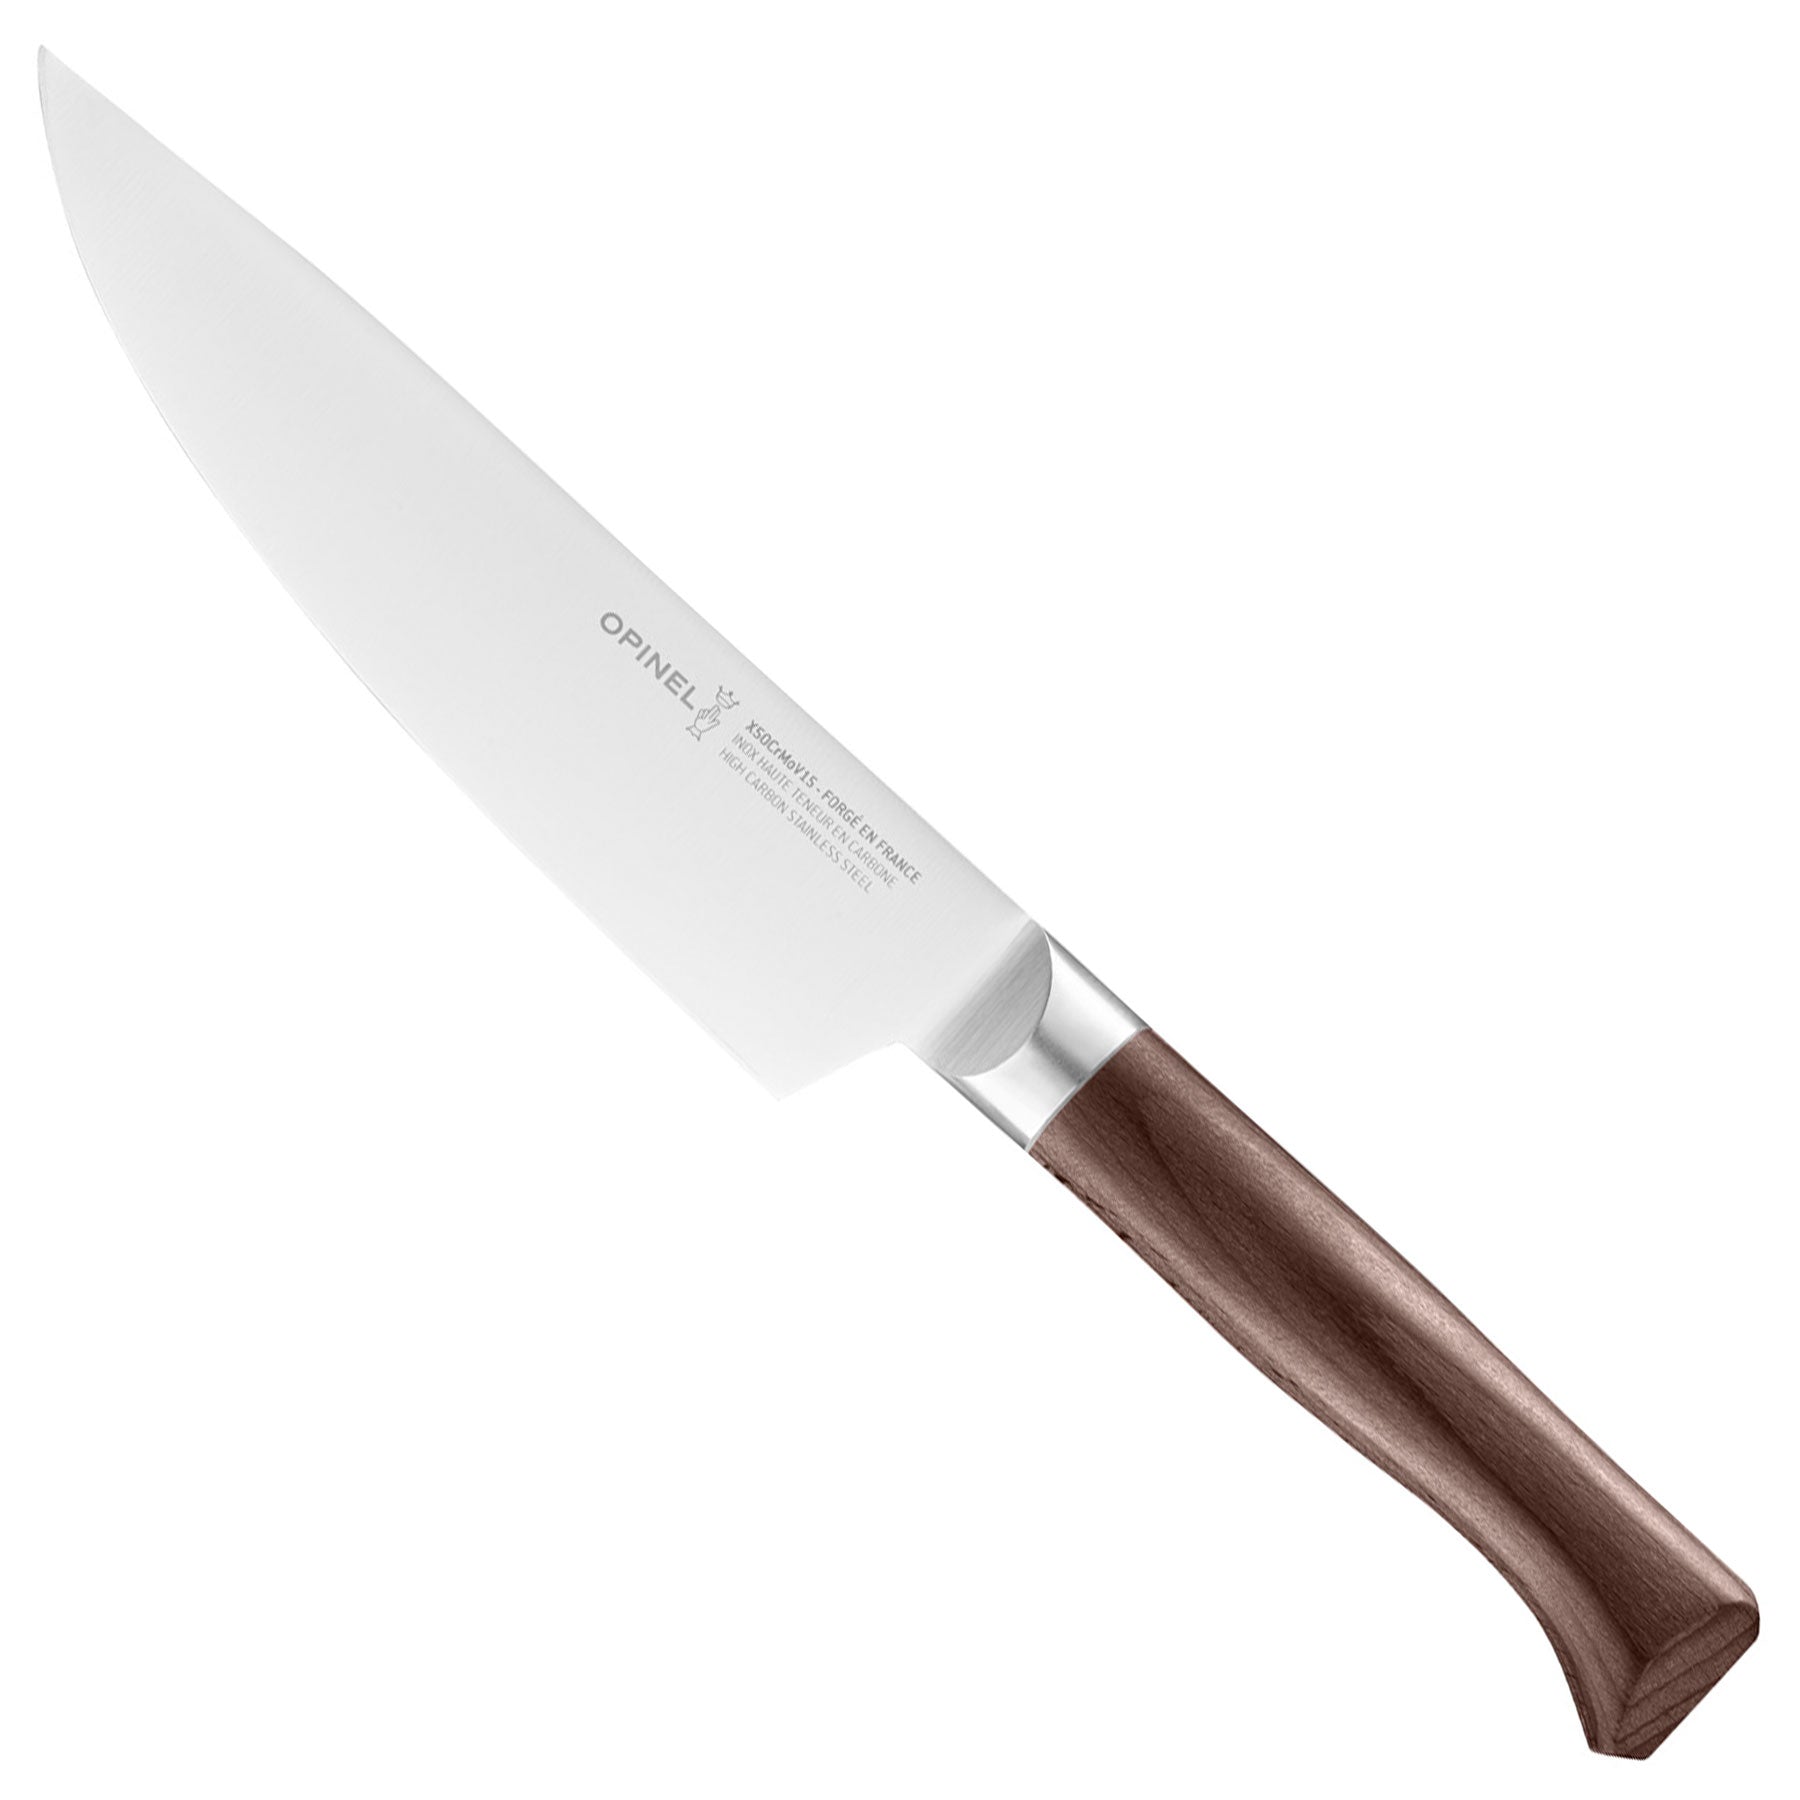 Chef-Grade Knife Collections Archives - Kechen Essentials